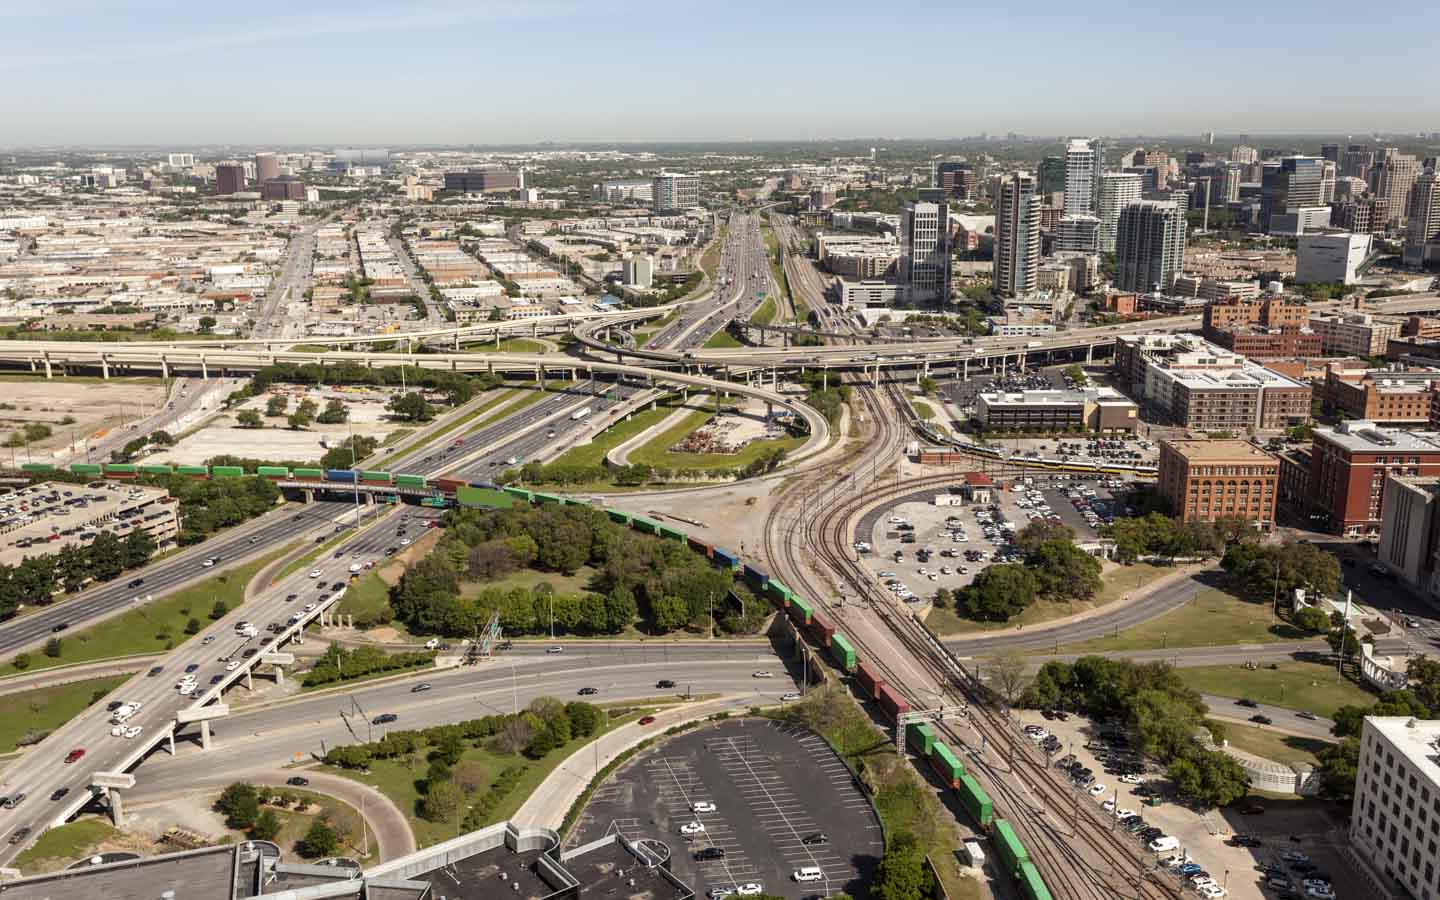 An aerial view of a city with highways, buildings, and Single Family Homes for Sale in Dallas Texas.